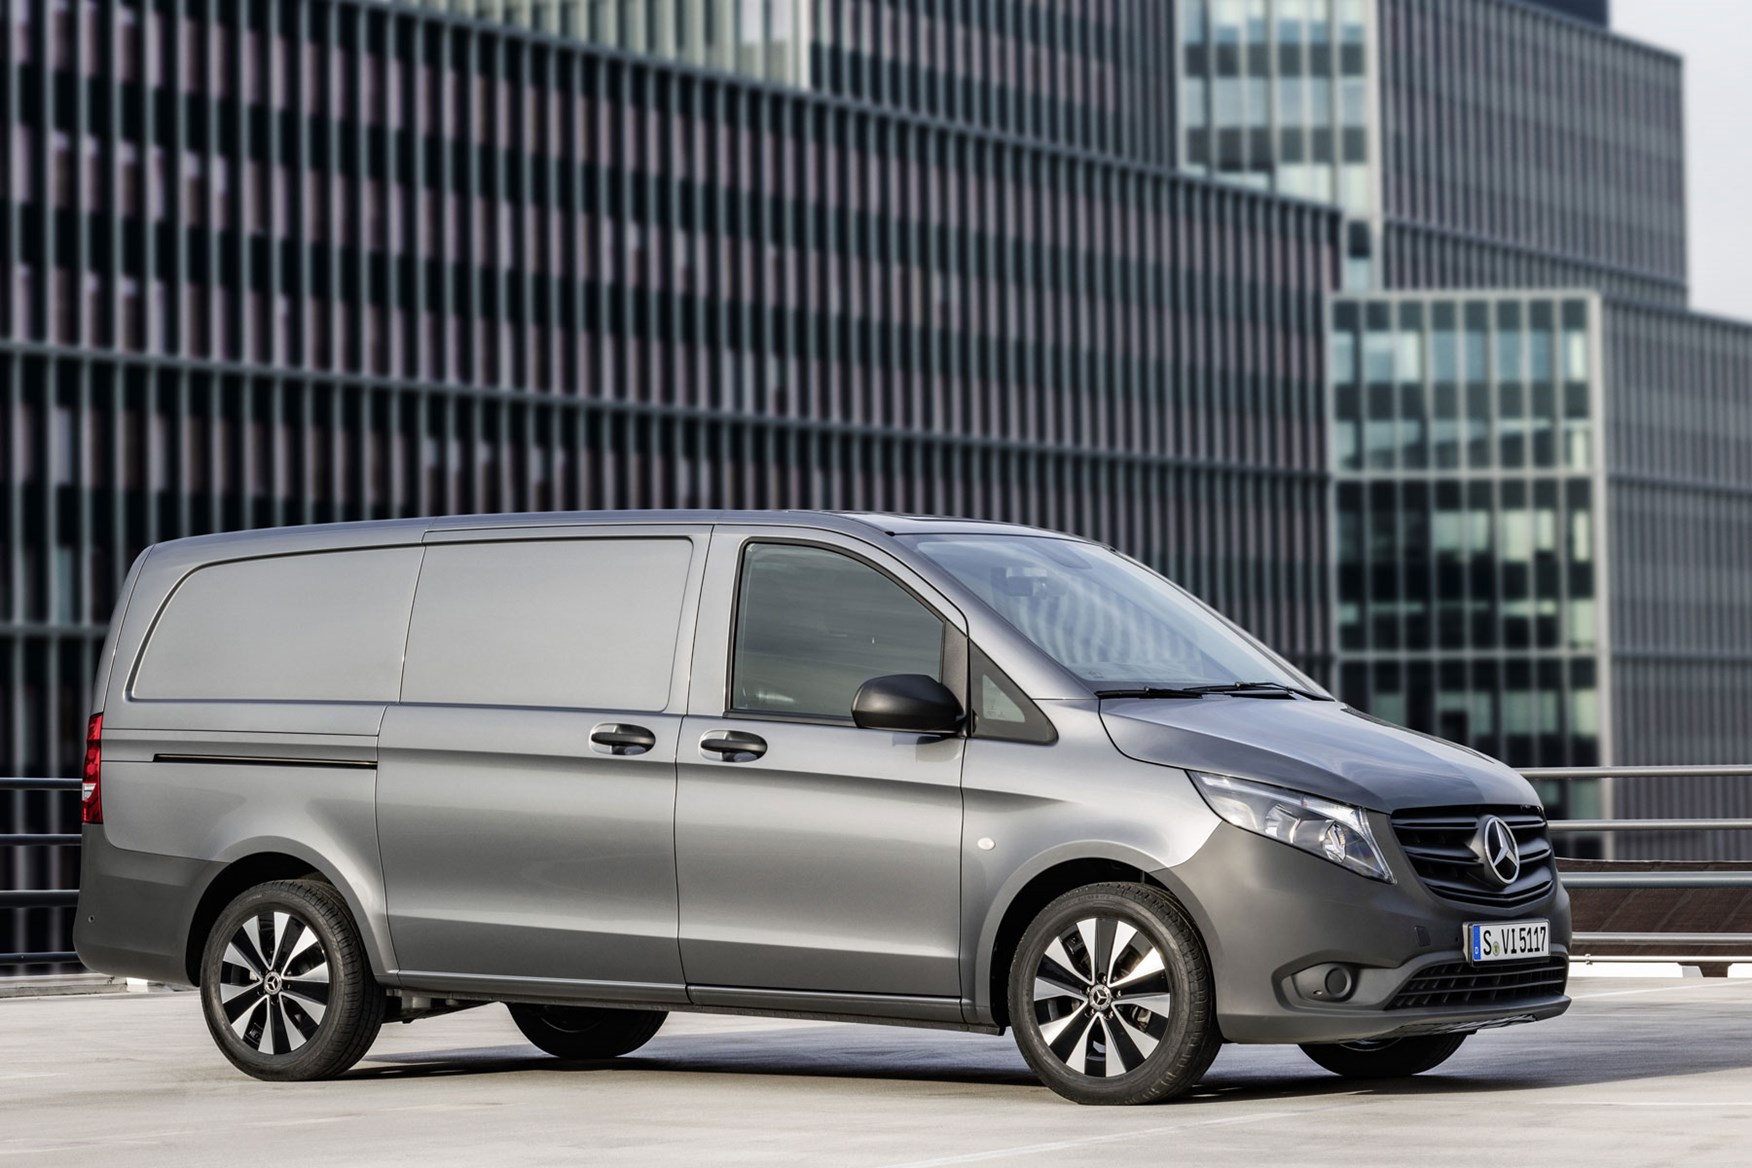 MercedesBenz Vito 2020 facelift UK pricing and spec, new